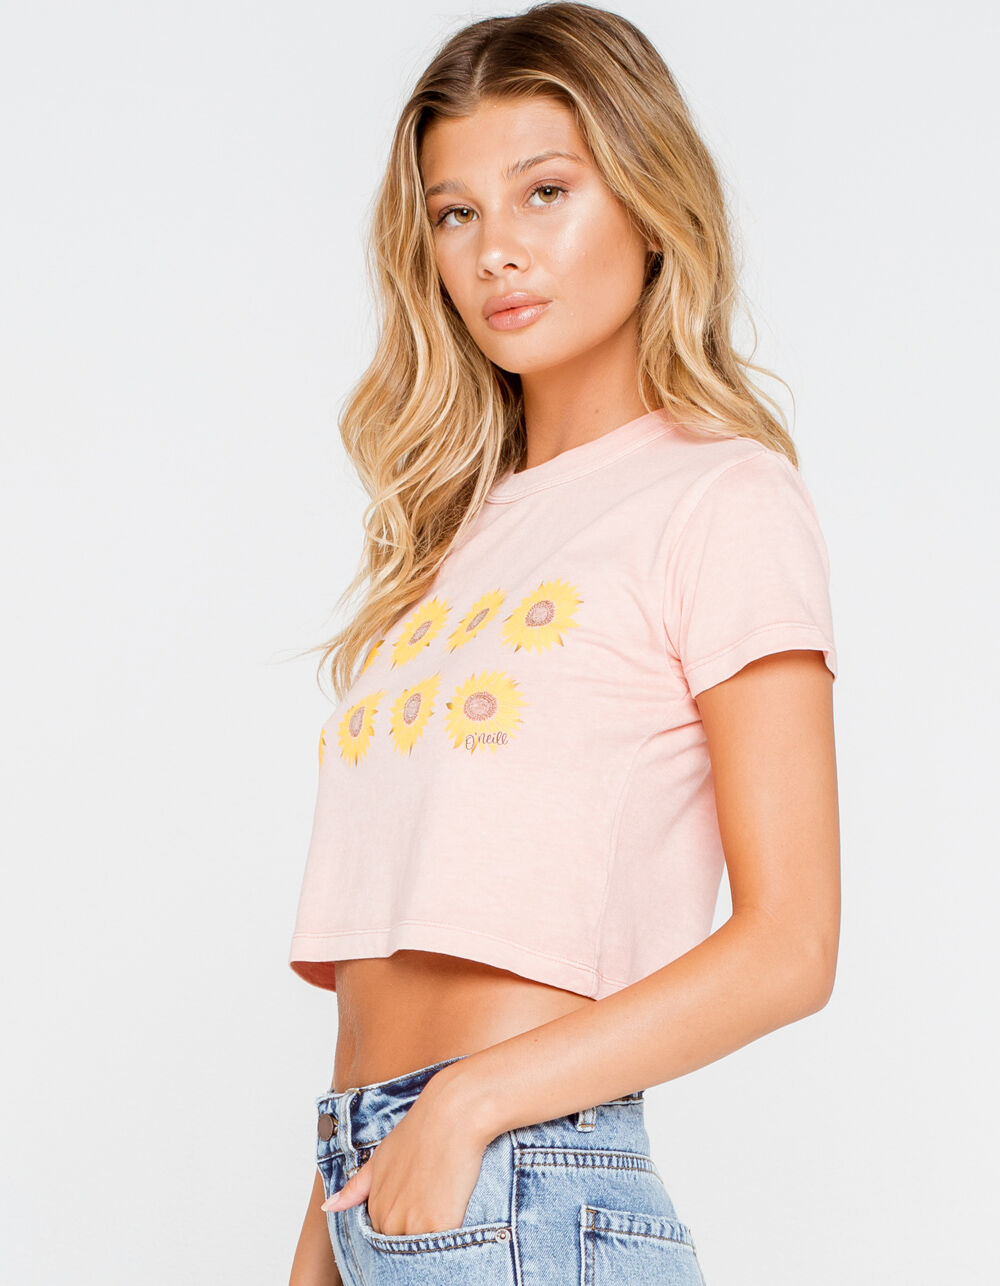 O'NEILL Melly Womens Baby Tee - PINK | Tillys